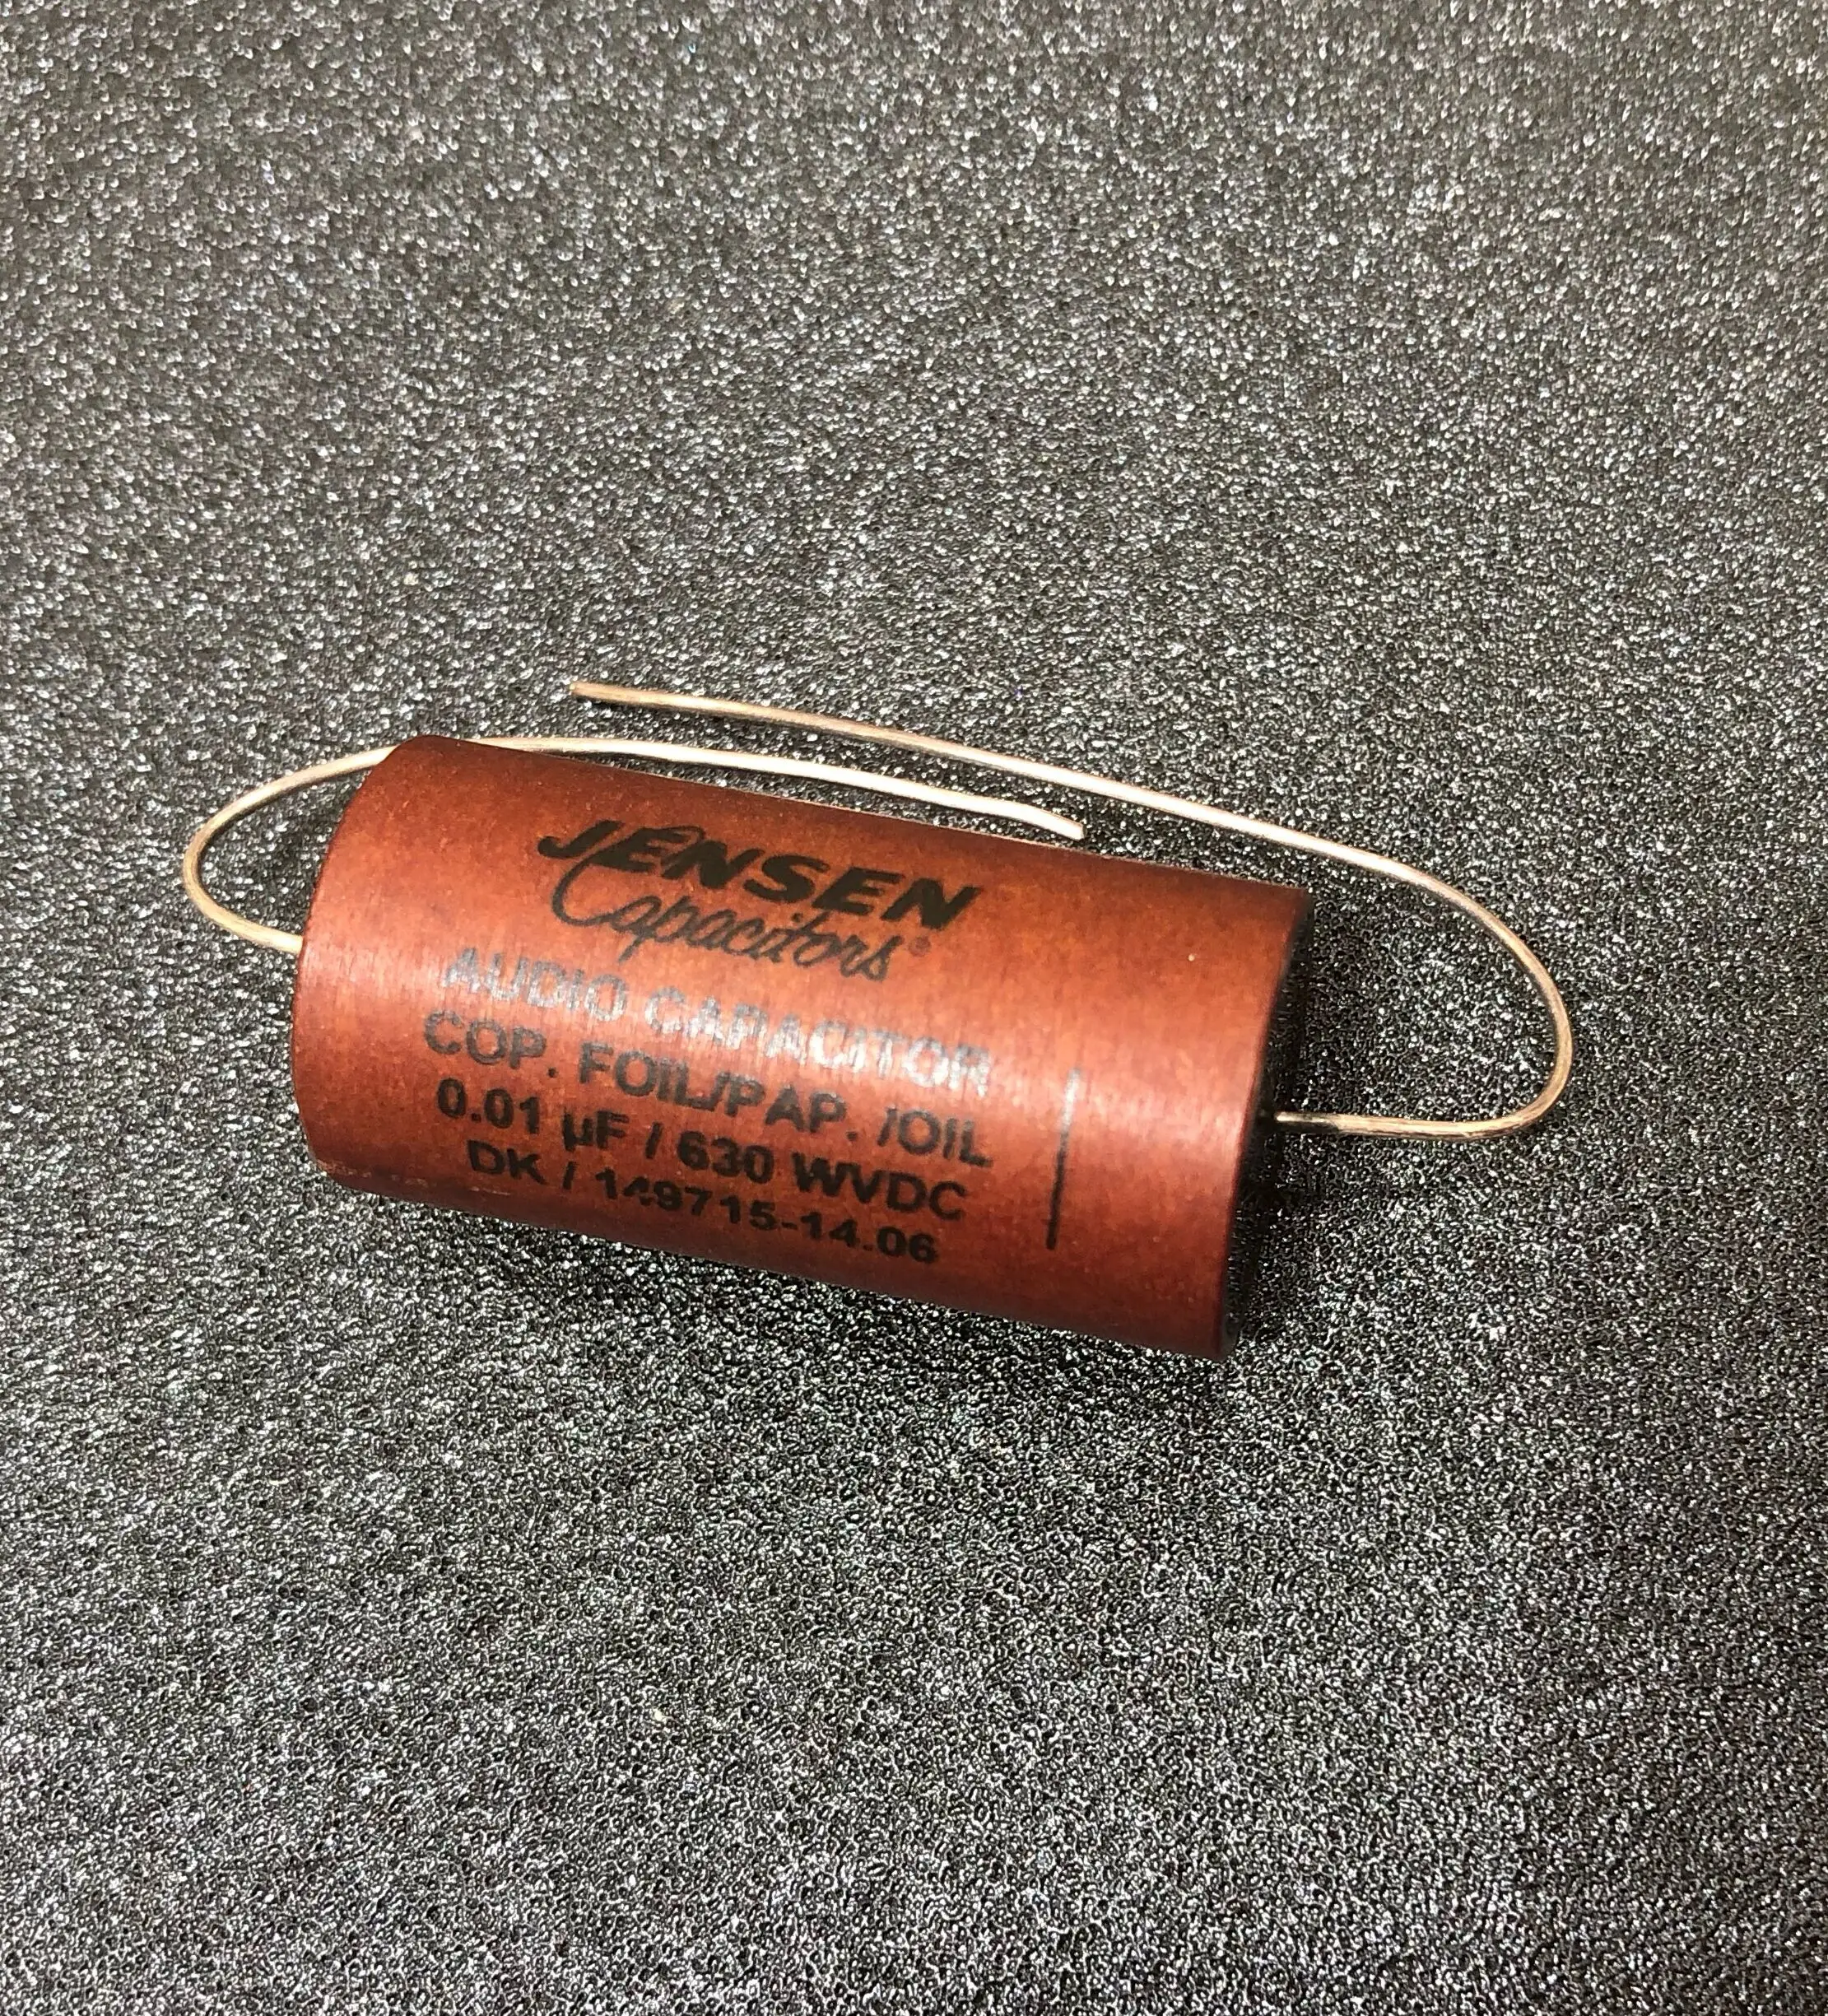 1pcs Danish original JENSEN Ares 0.01UF-1.0UFuf/630v oil-immersed copper foil Silver lead-out paper tube capacitor free shipping